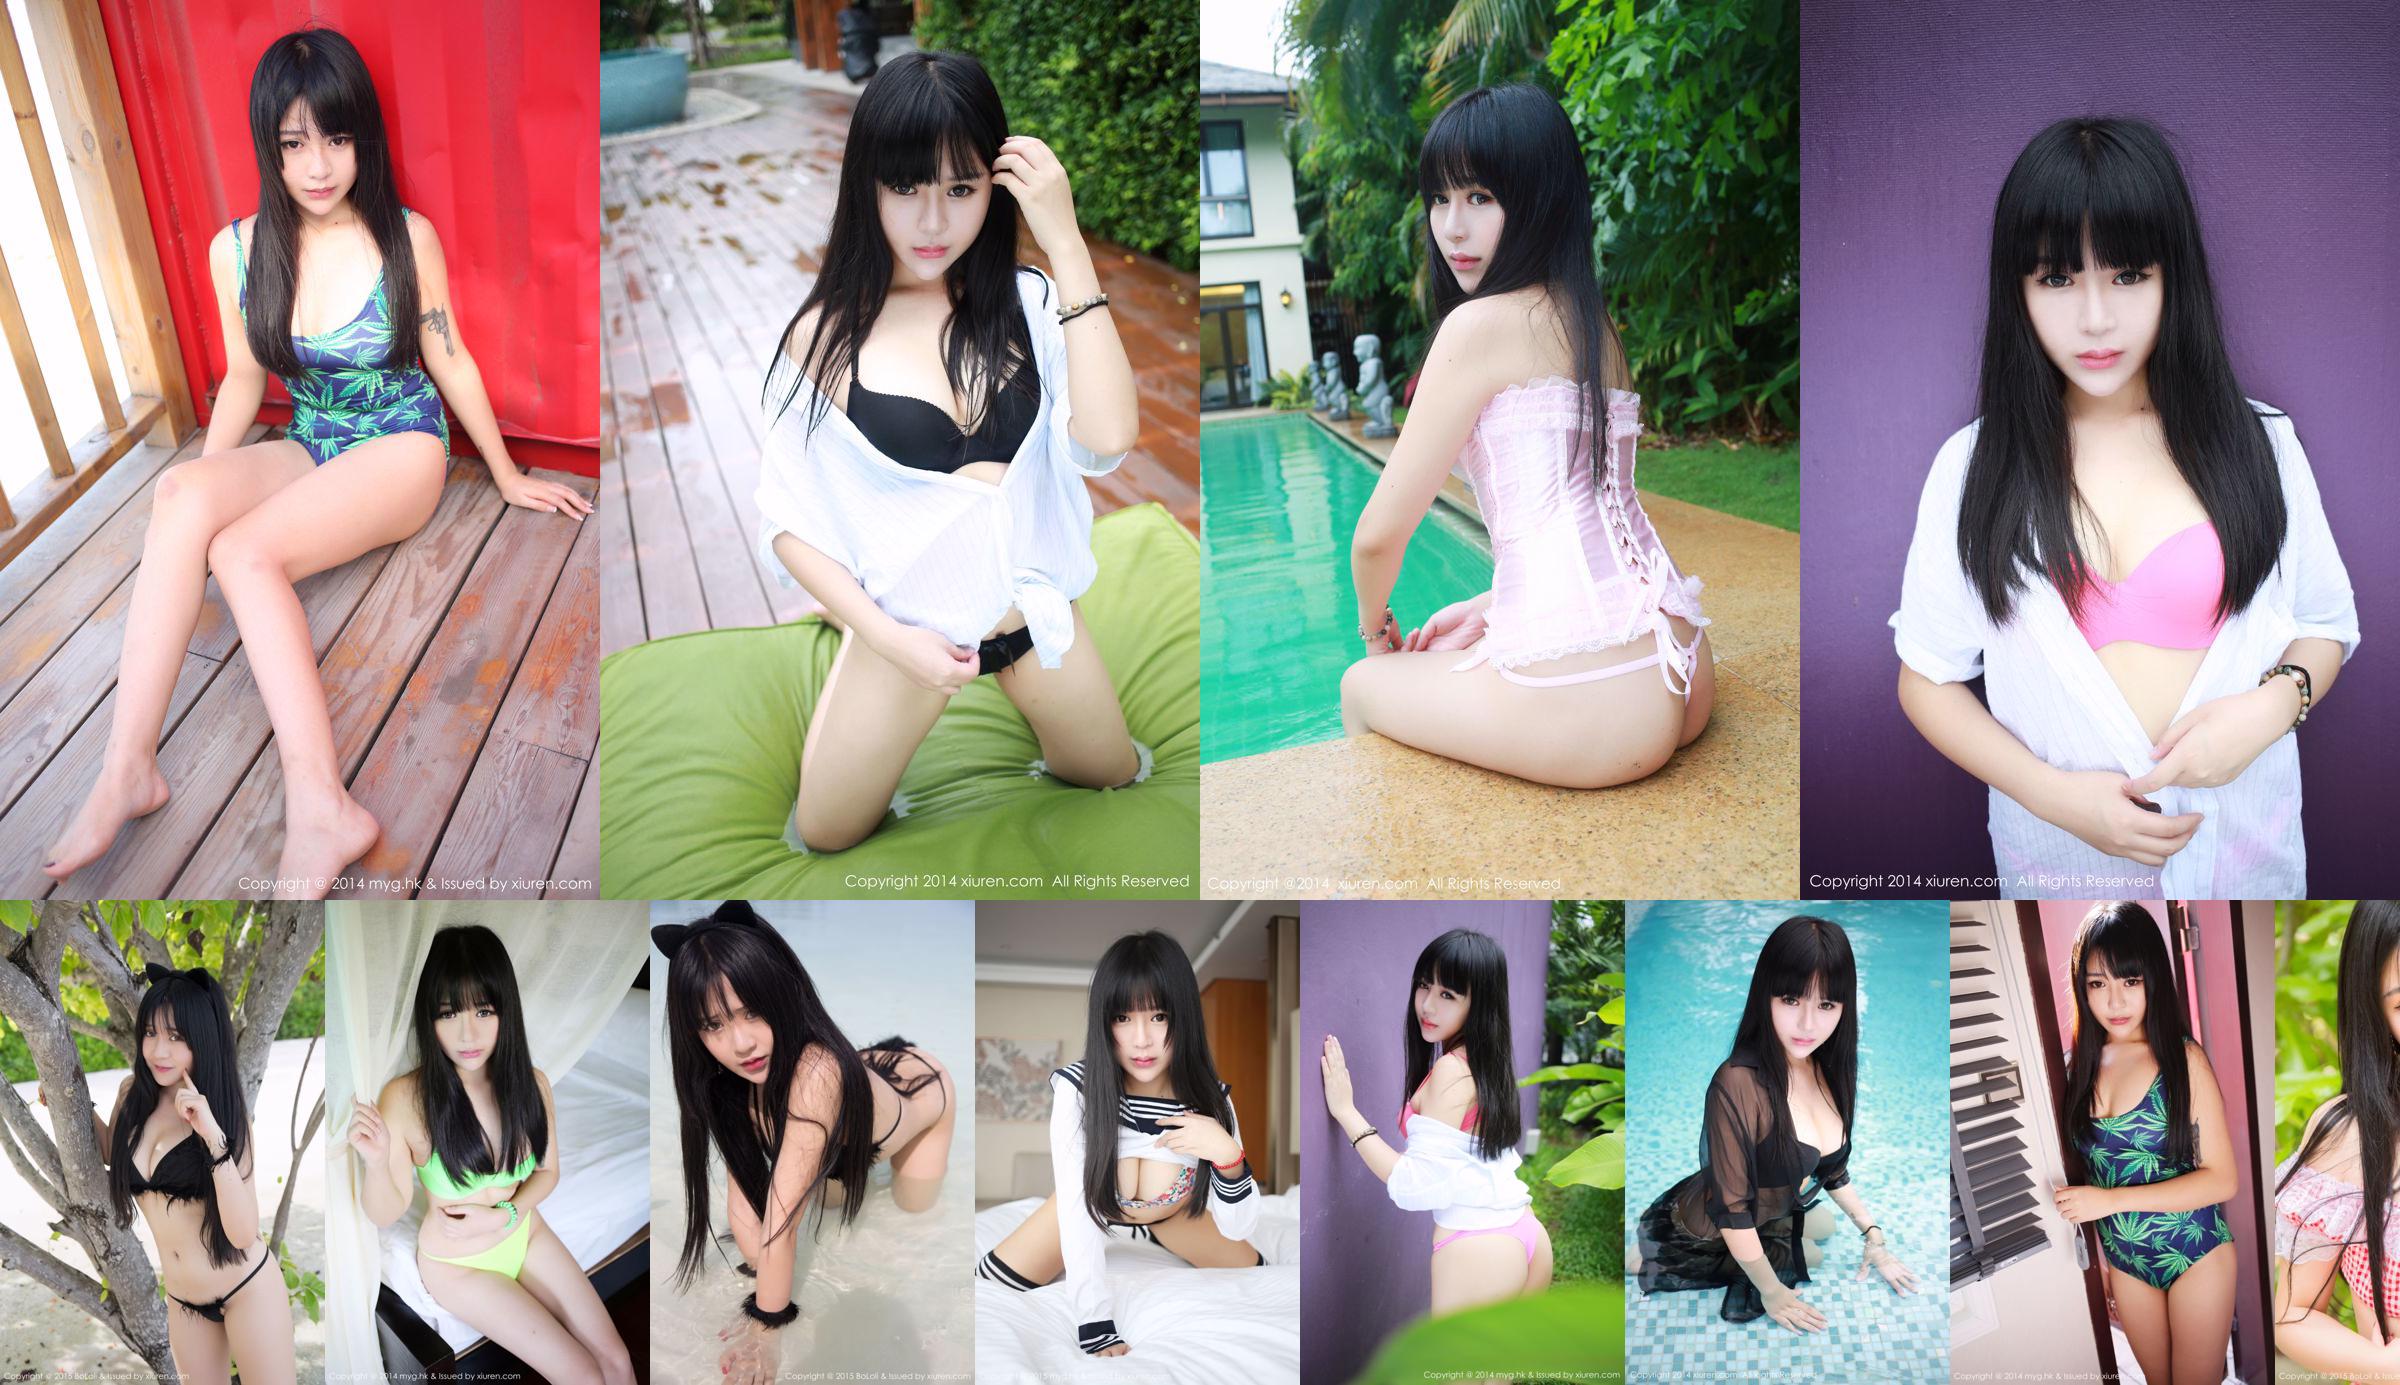 Babao icey "Outdoor Shooting Underwear + Wet Body" [MyGirl] Vol.022 No.a89609 Page 3